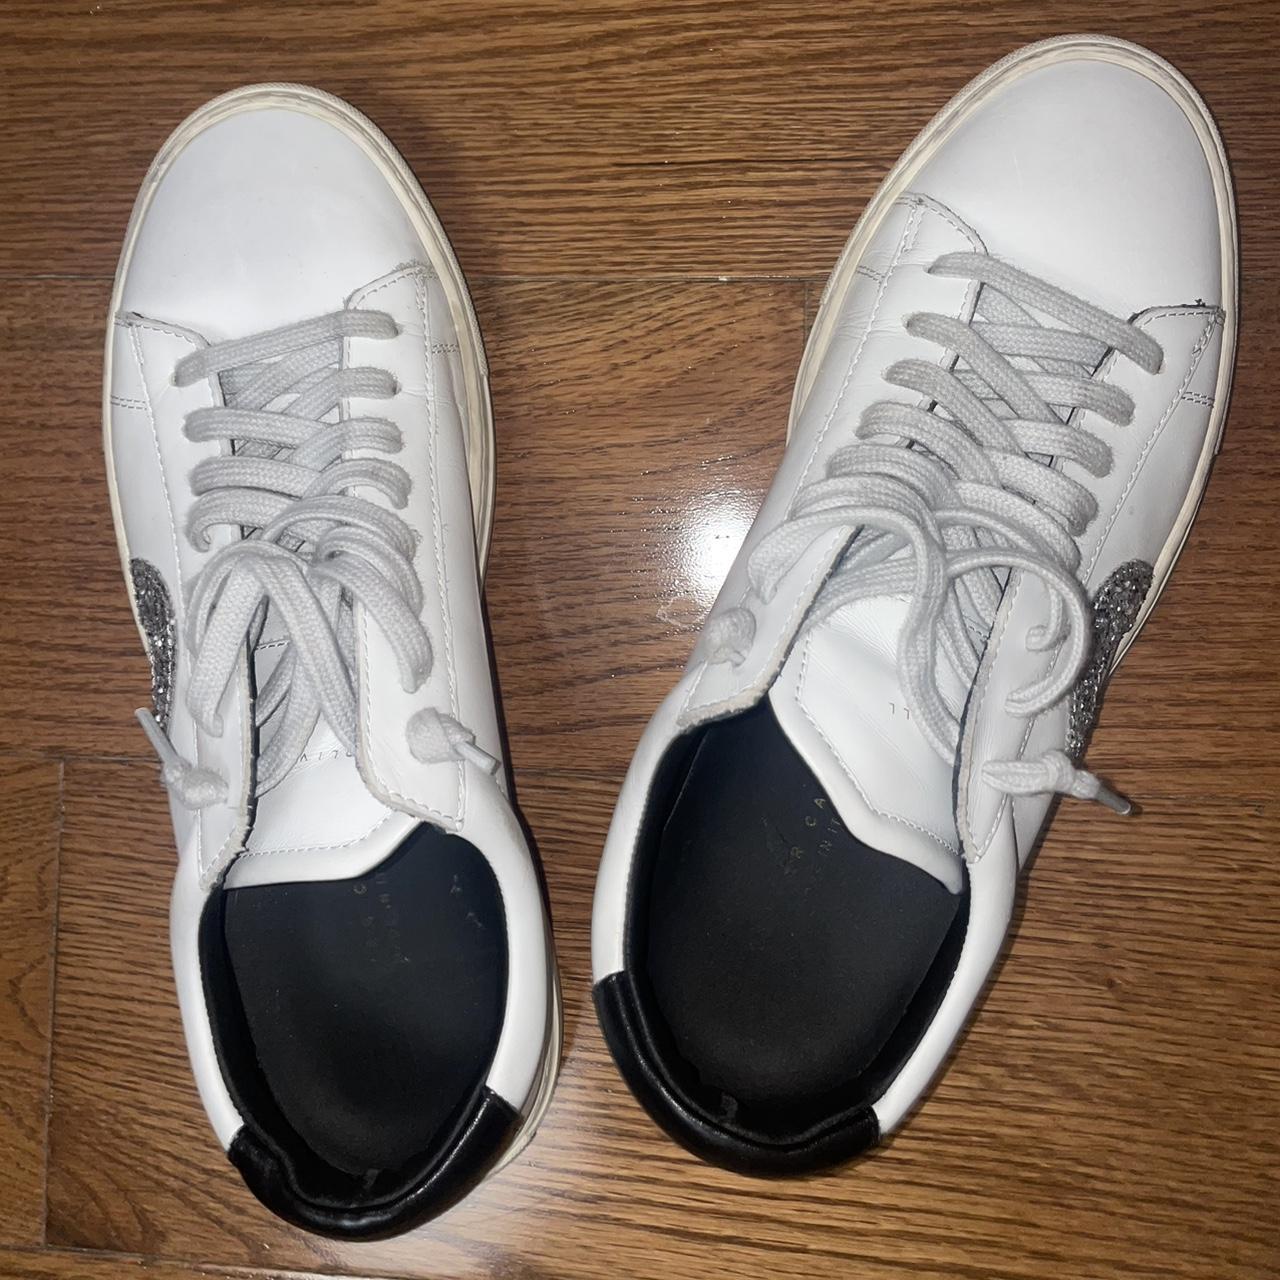 What Makes Golden Goose Sneakers So Popular? - Oliver Cabell